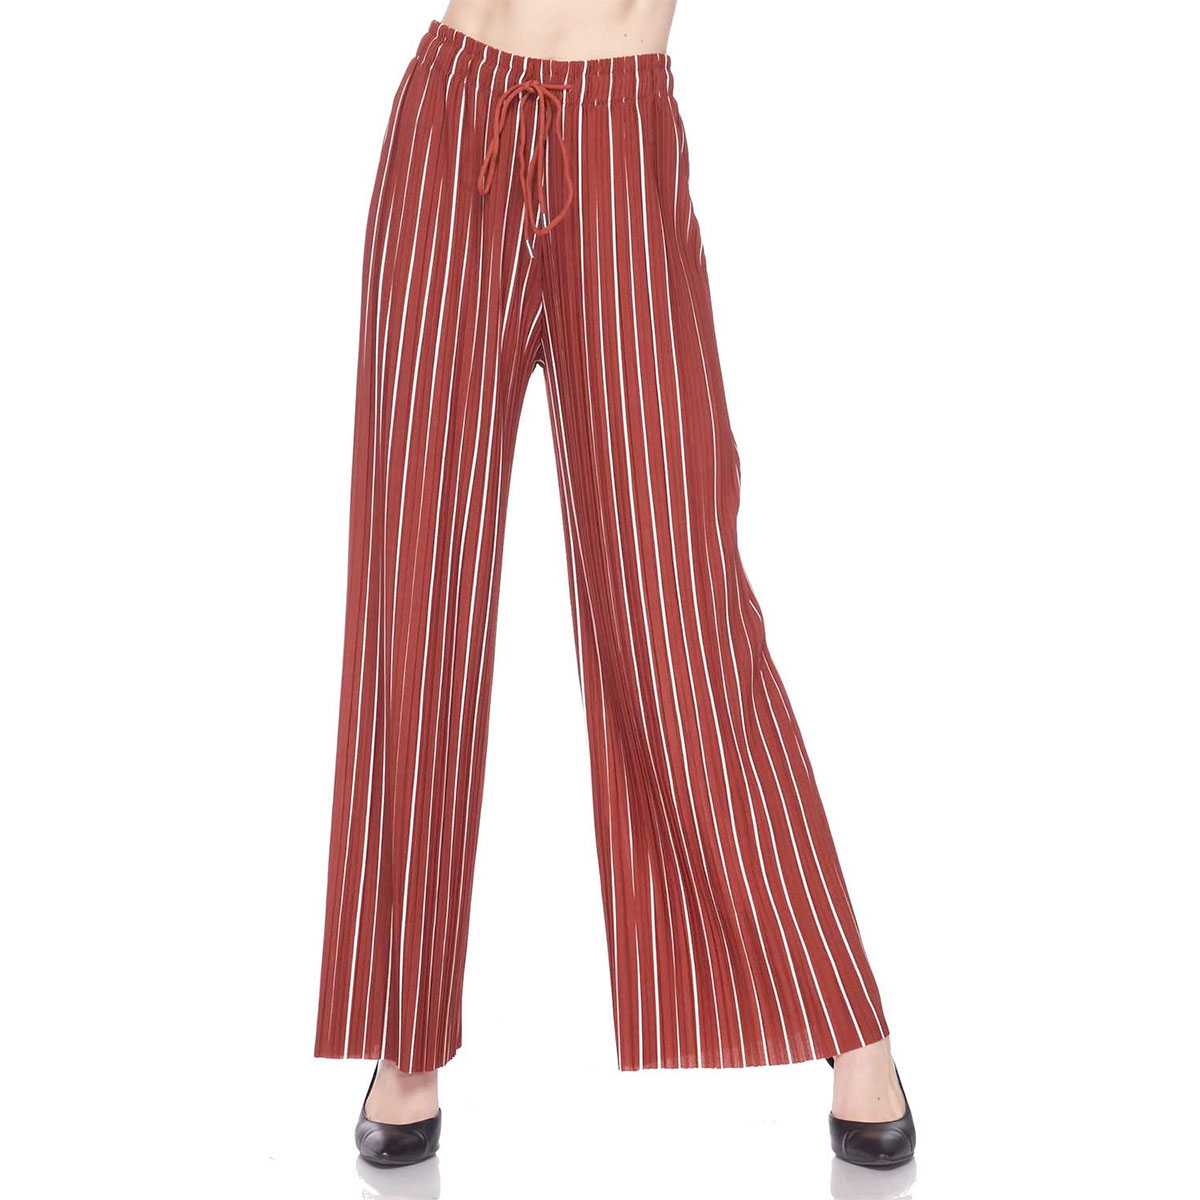 Ankle Length - #22 Rust-White Striped w/ Drawstring